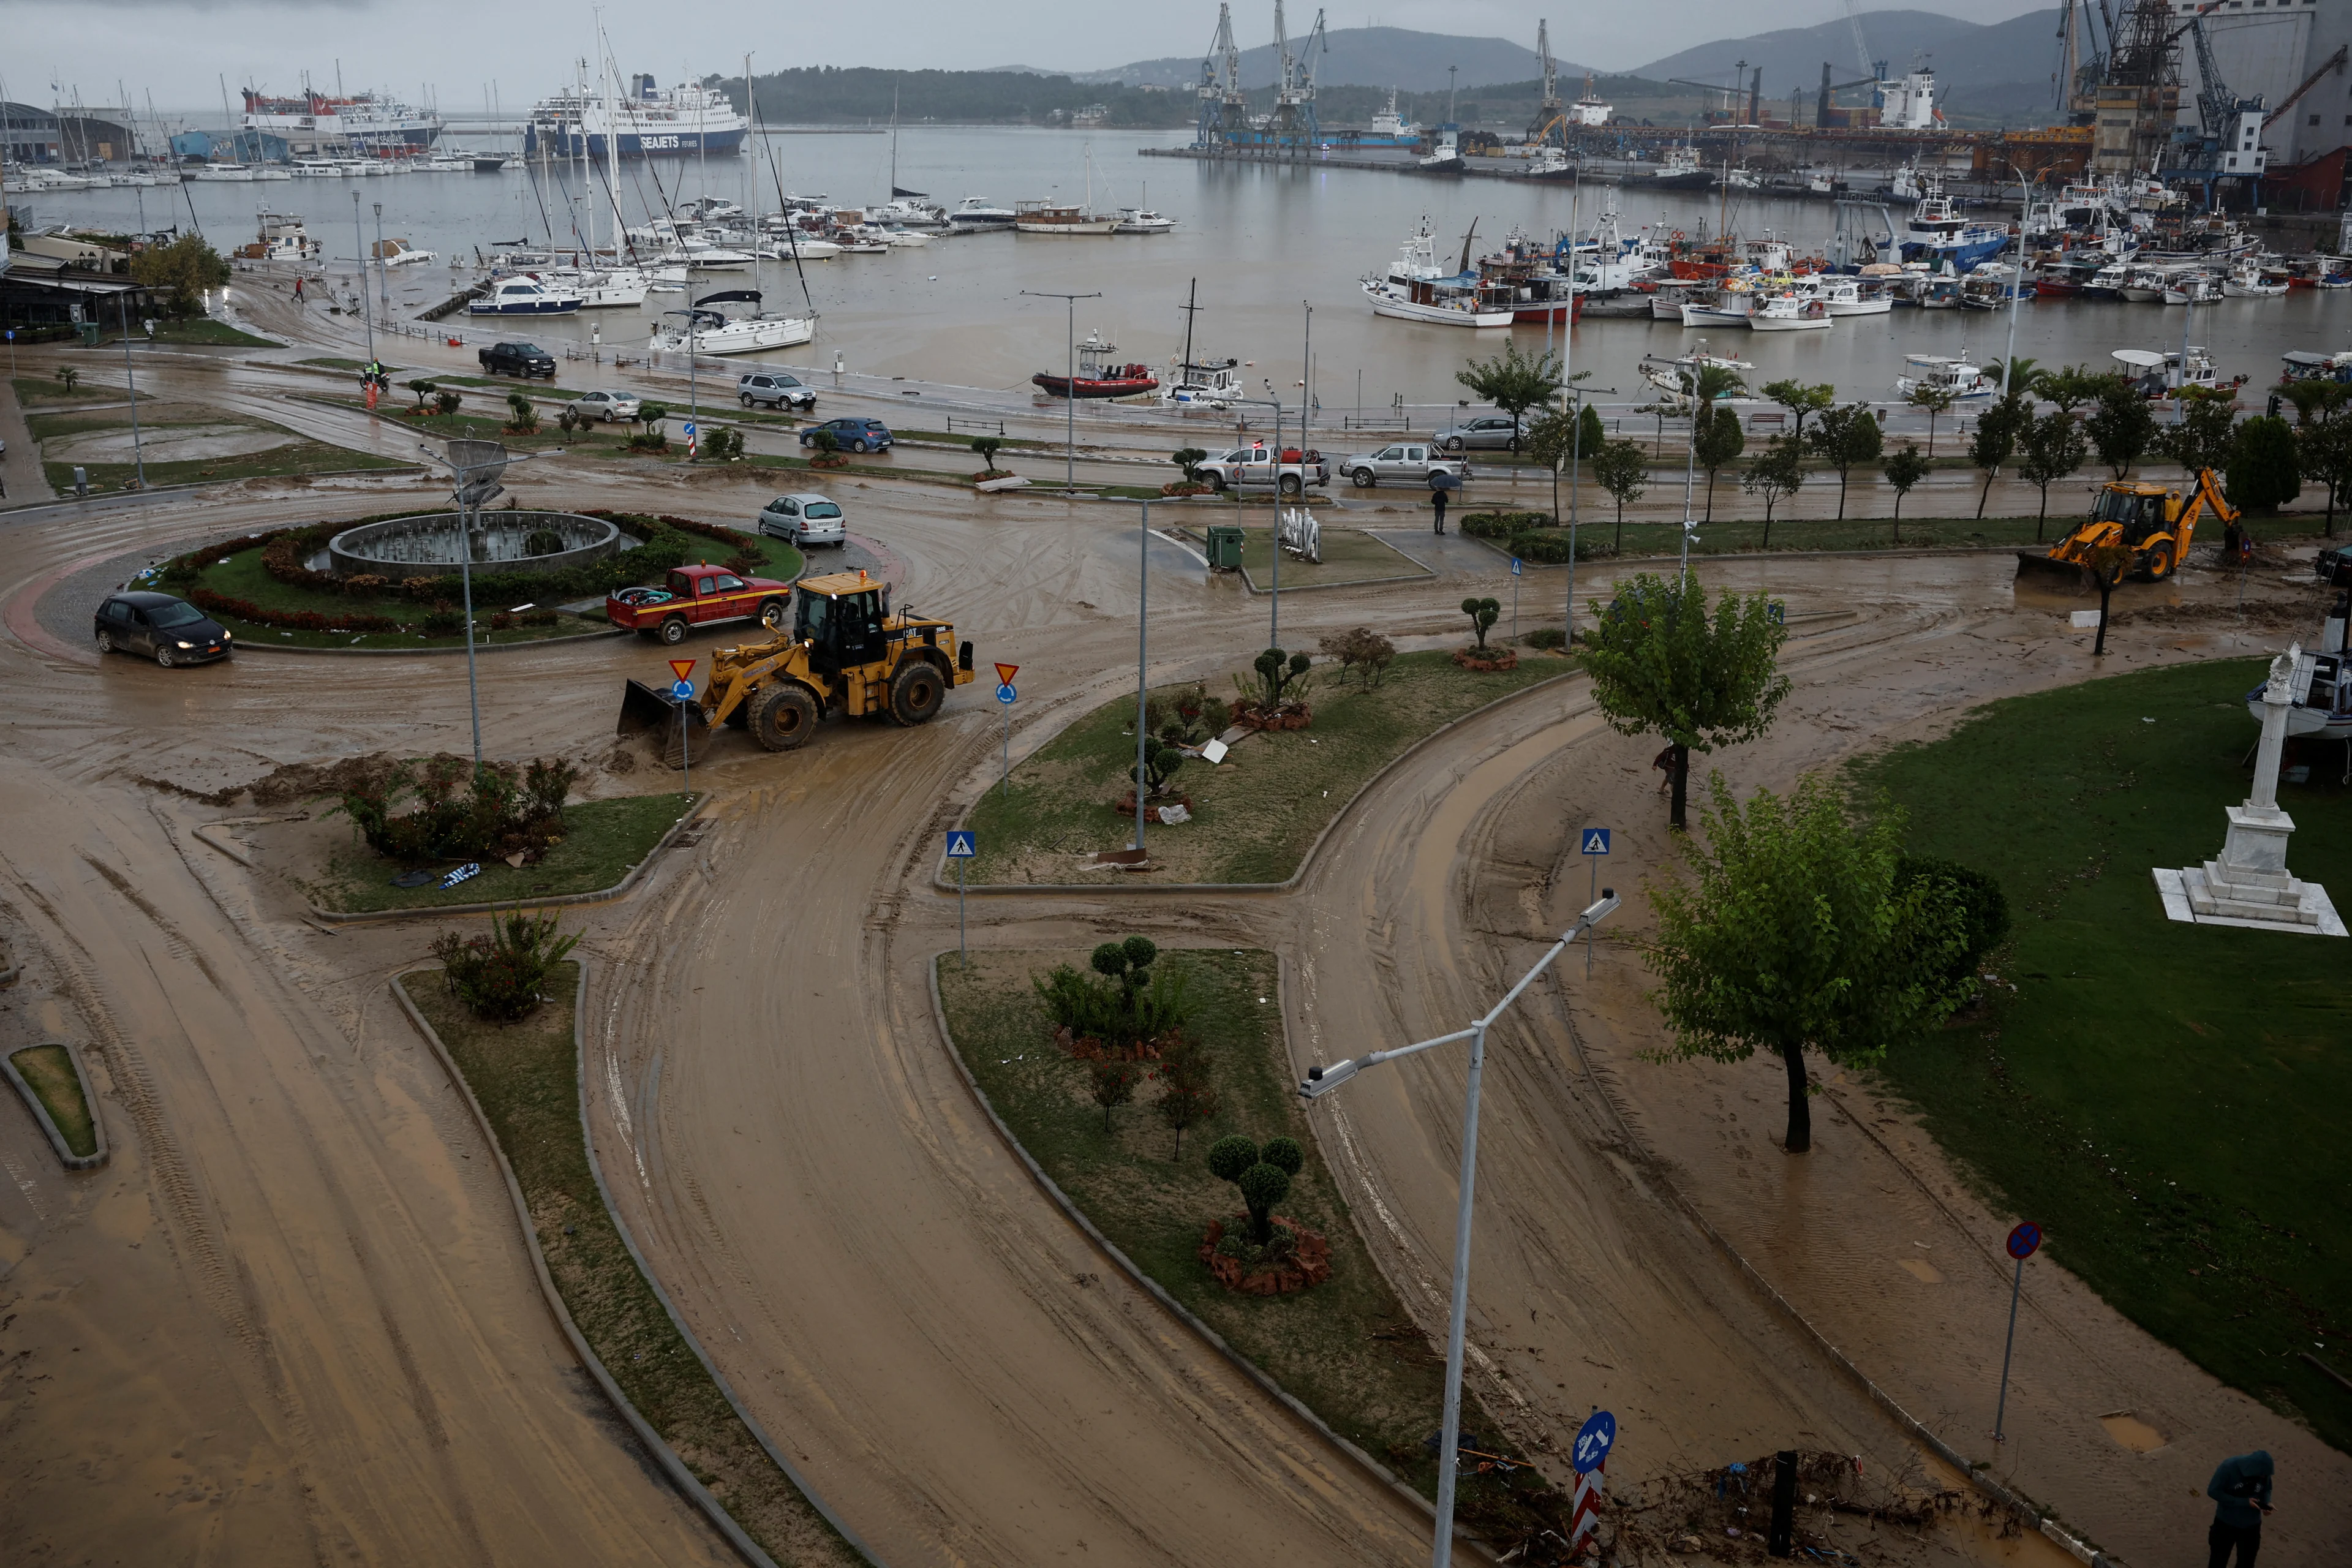 EUROPE-WEATHER-GREECE-STORM2 - Reuters - Sept.28